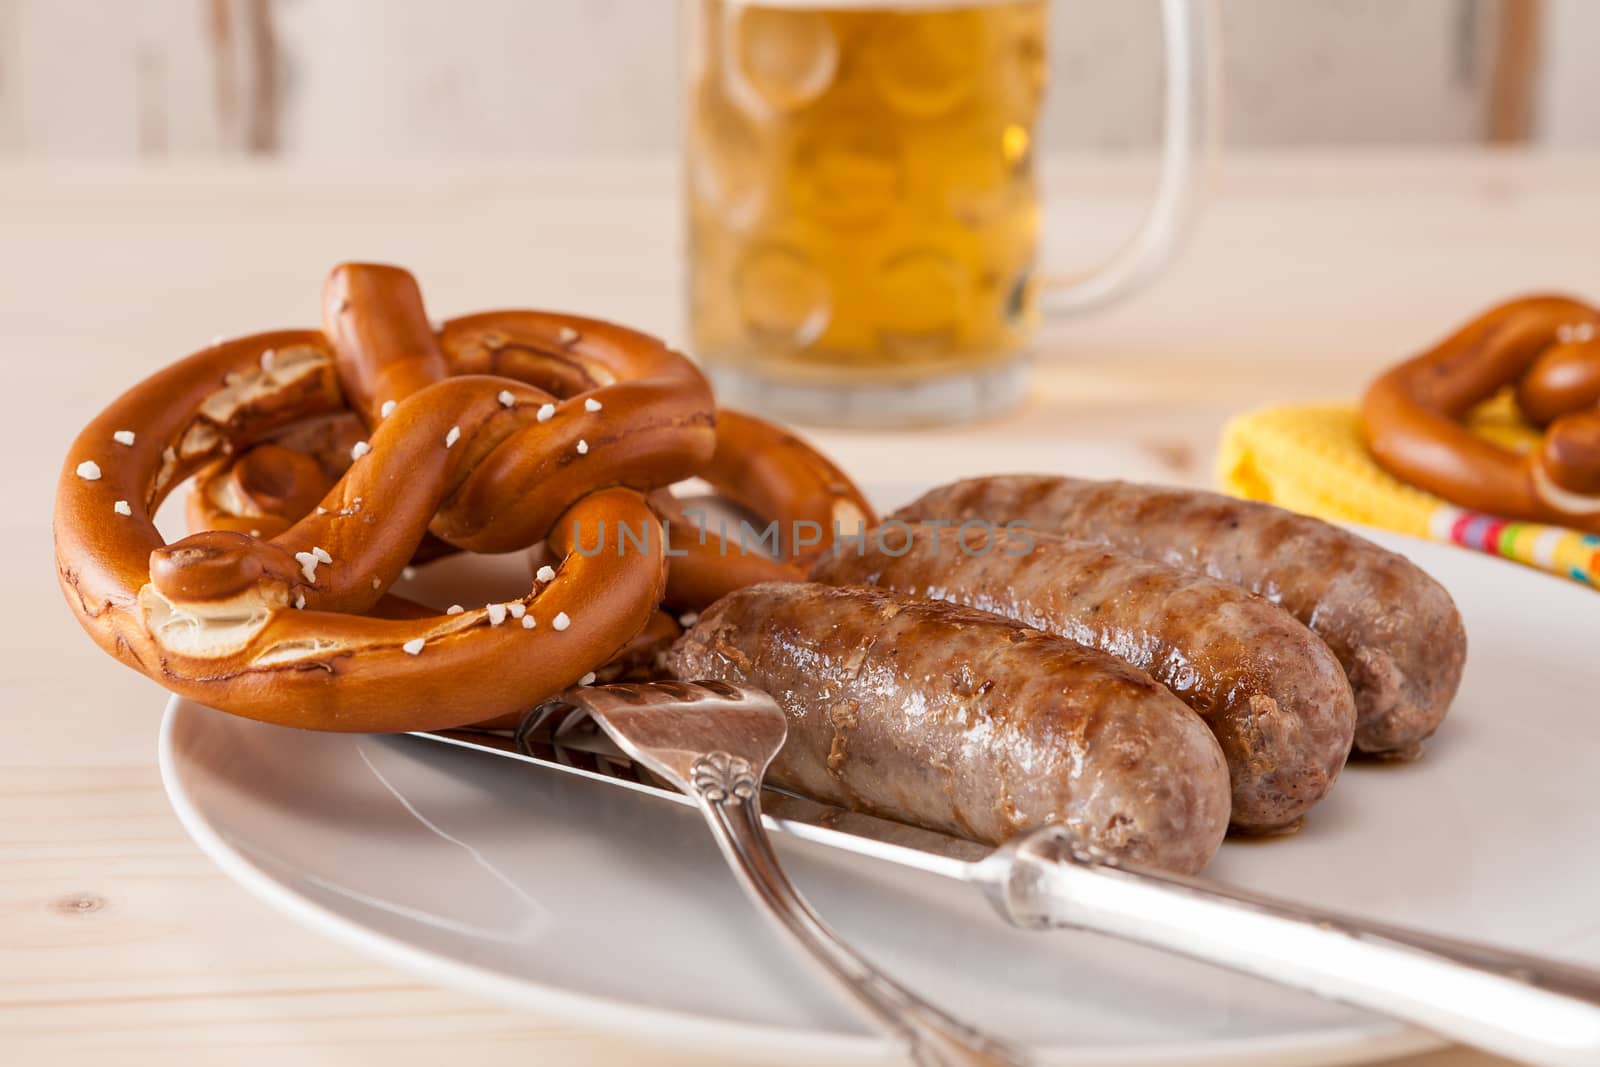 Closeup of bavarian cooked sausage and pretzel and a glass of beer